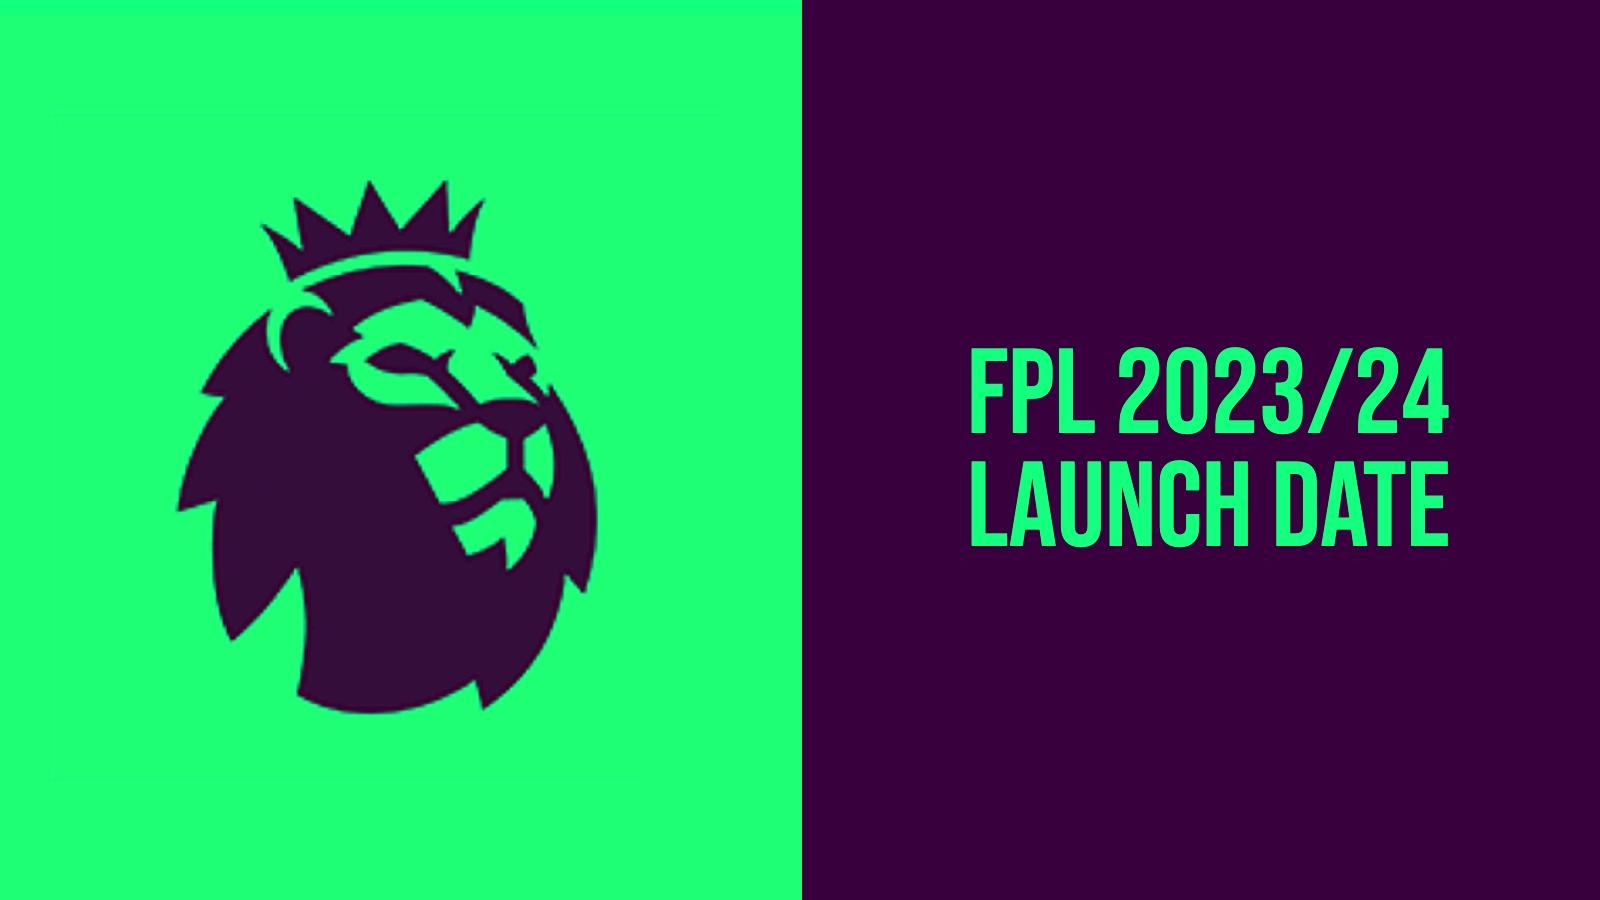 The new season is almost upon us - Fantasy Premier League